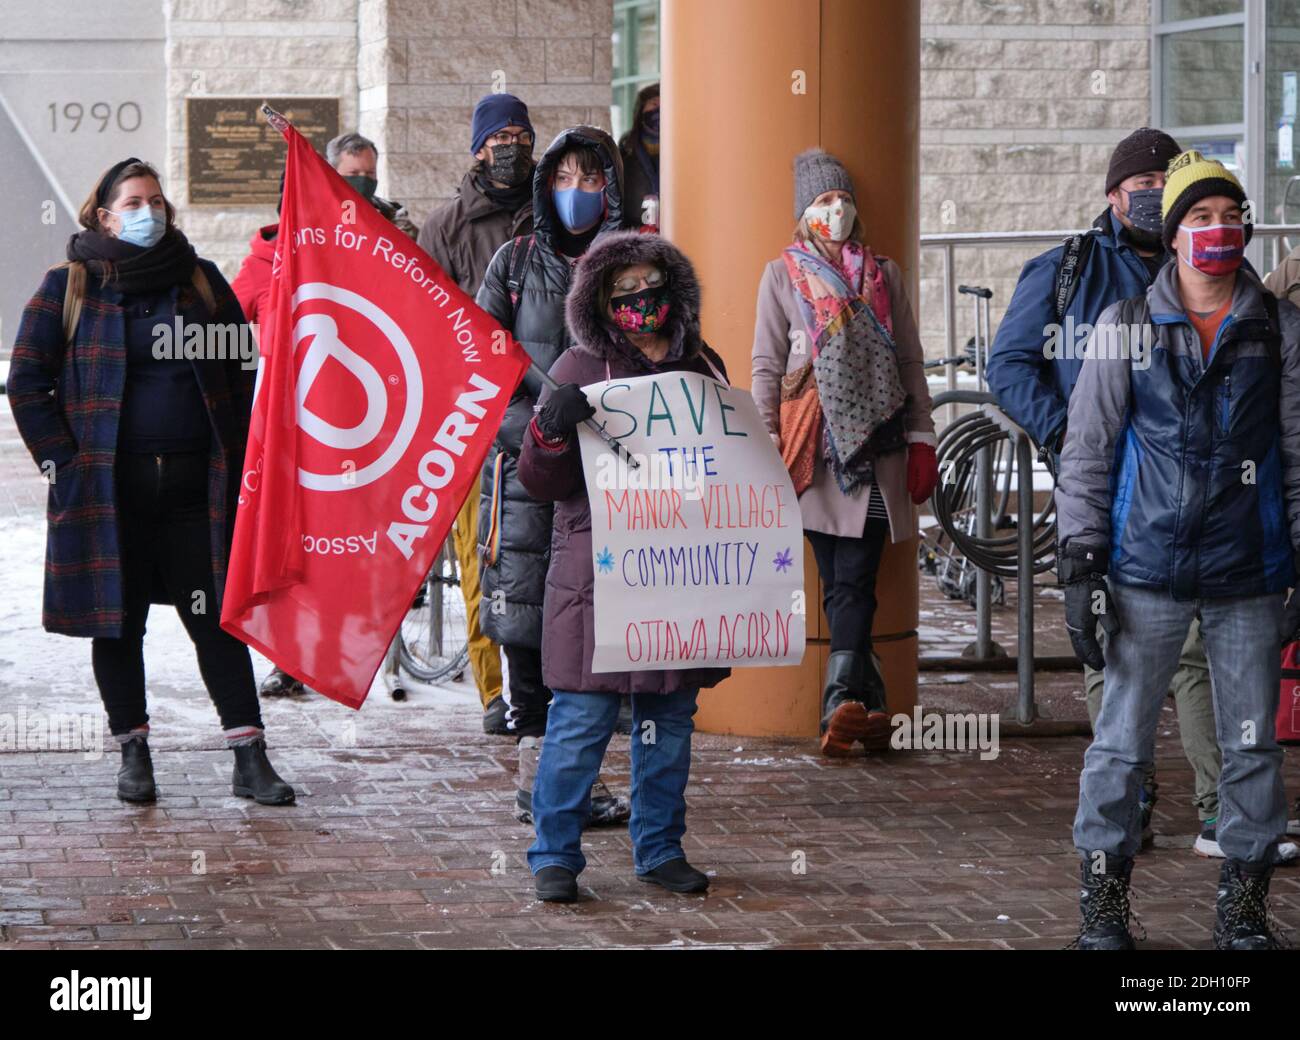 Ottawa, Canada. December 9th, 2020. Member of the ACORN group demanding to save the Manor village Community phased for destruction due to transit expansion. Representative from various community groups protest against the 2021 city budget citing that in fails to address multiple crises. The group specifically argues against increase in police budget, and the bailout of the OSEG sports group, over needed community support badly hit by the ongoing pandemic. Credit: meanderingemu/Alamy Live News Stock Photo